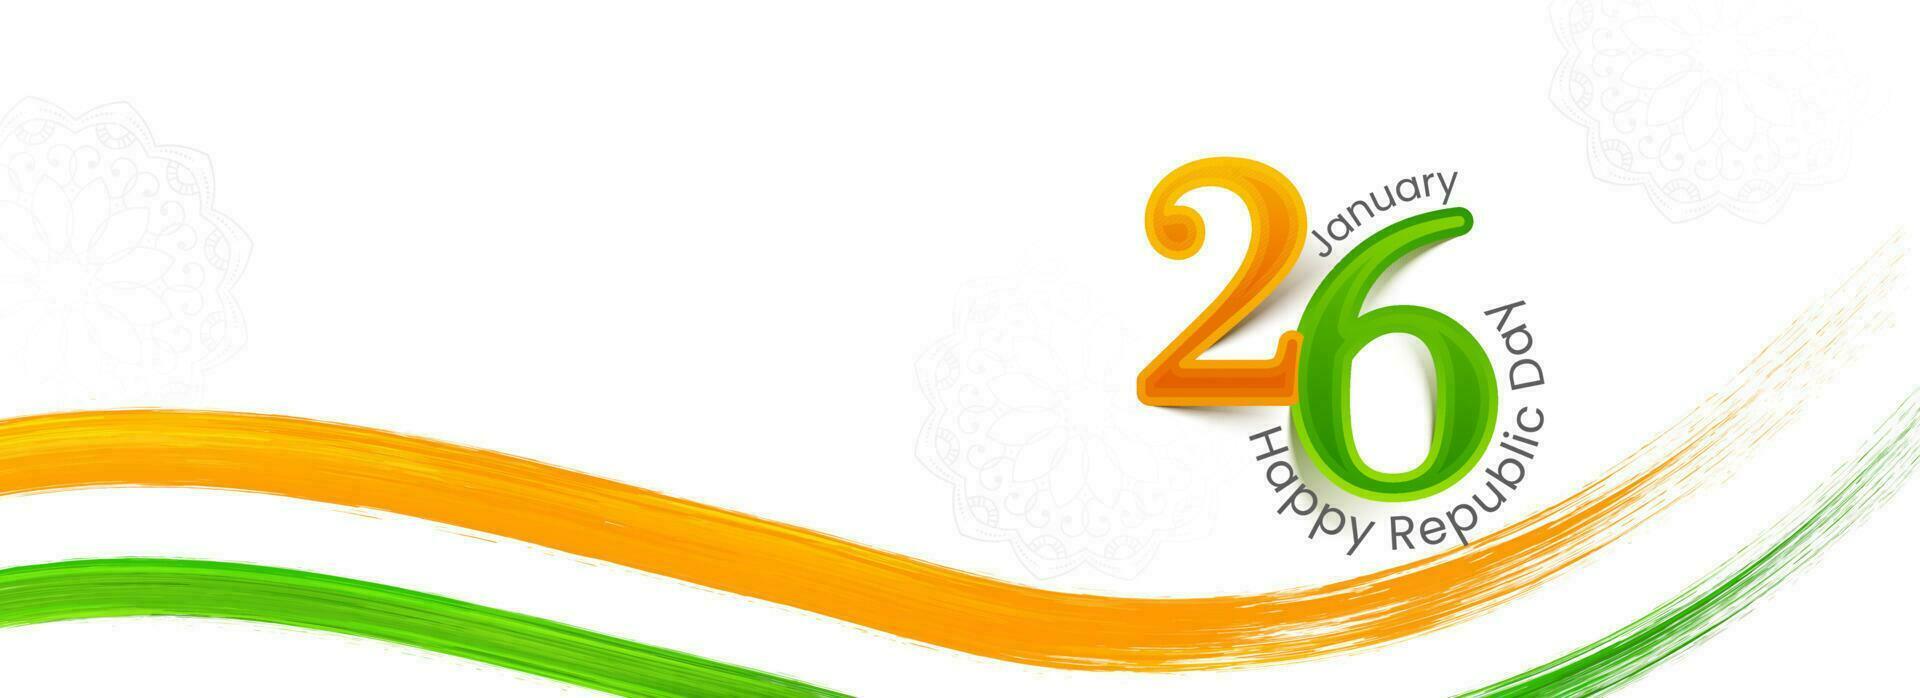 26 January Happy Republic Day Font With Tricolor Brush Stroke Wave Against White Background. vector